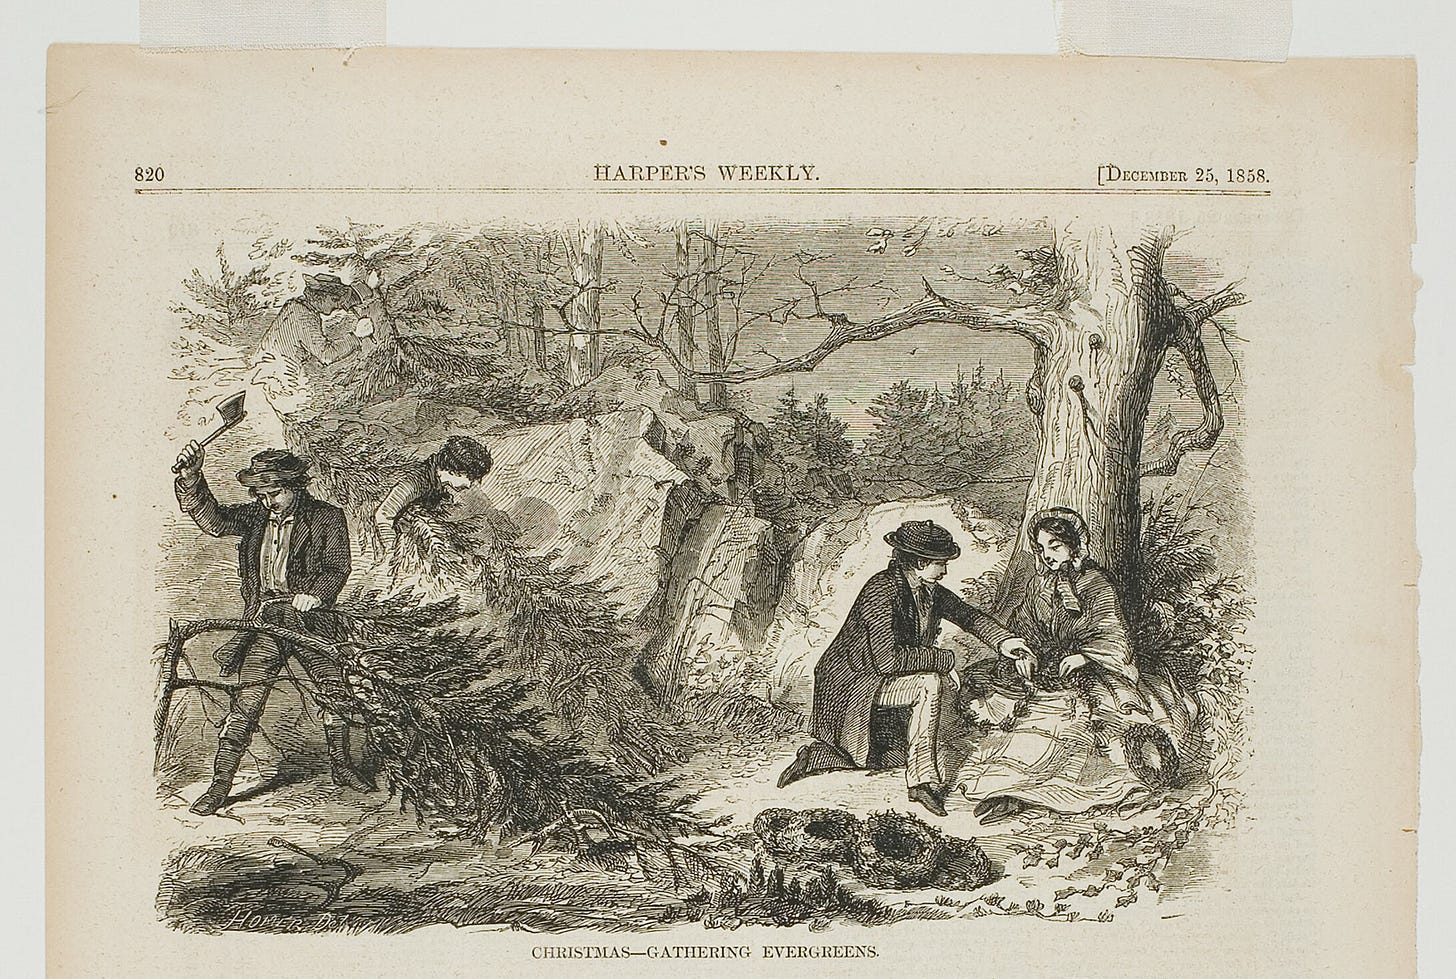 A wood engraving. Two men work on chopping down evergreens on the left while another man tends to a woman sitting underneath a tree.